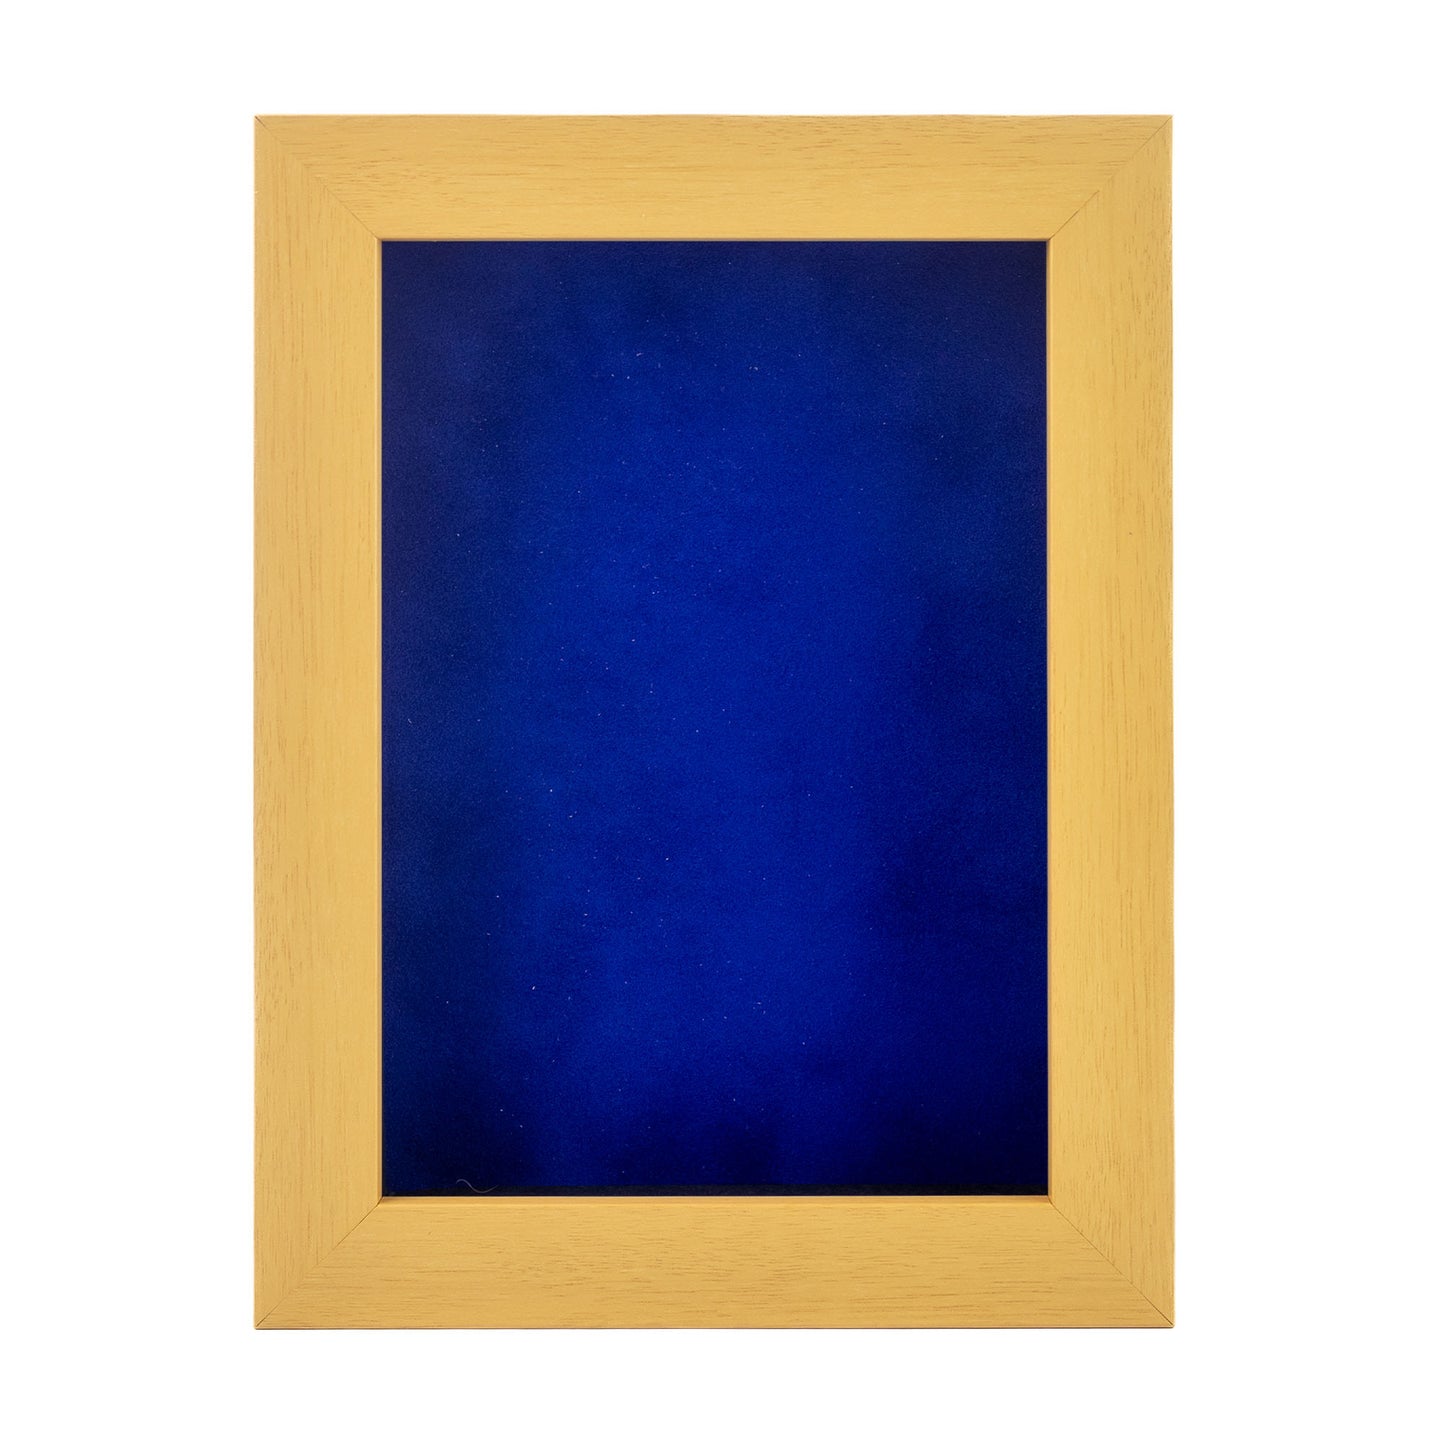 Natural Shadow Box Frame With Royal Blue Acid-Free Suede Backing